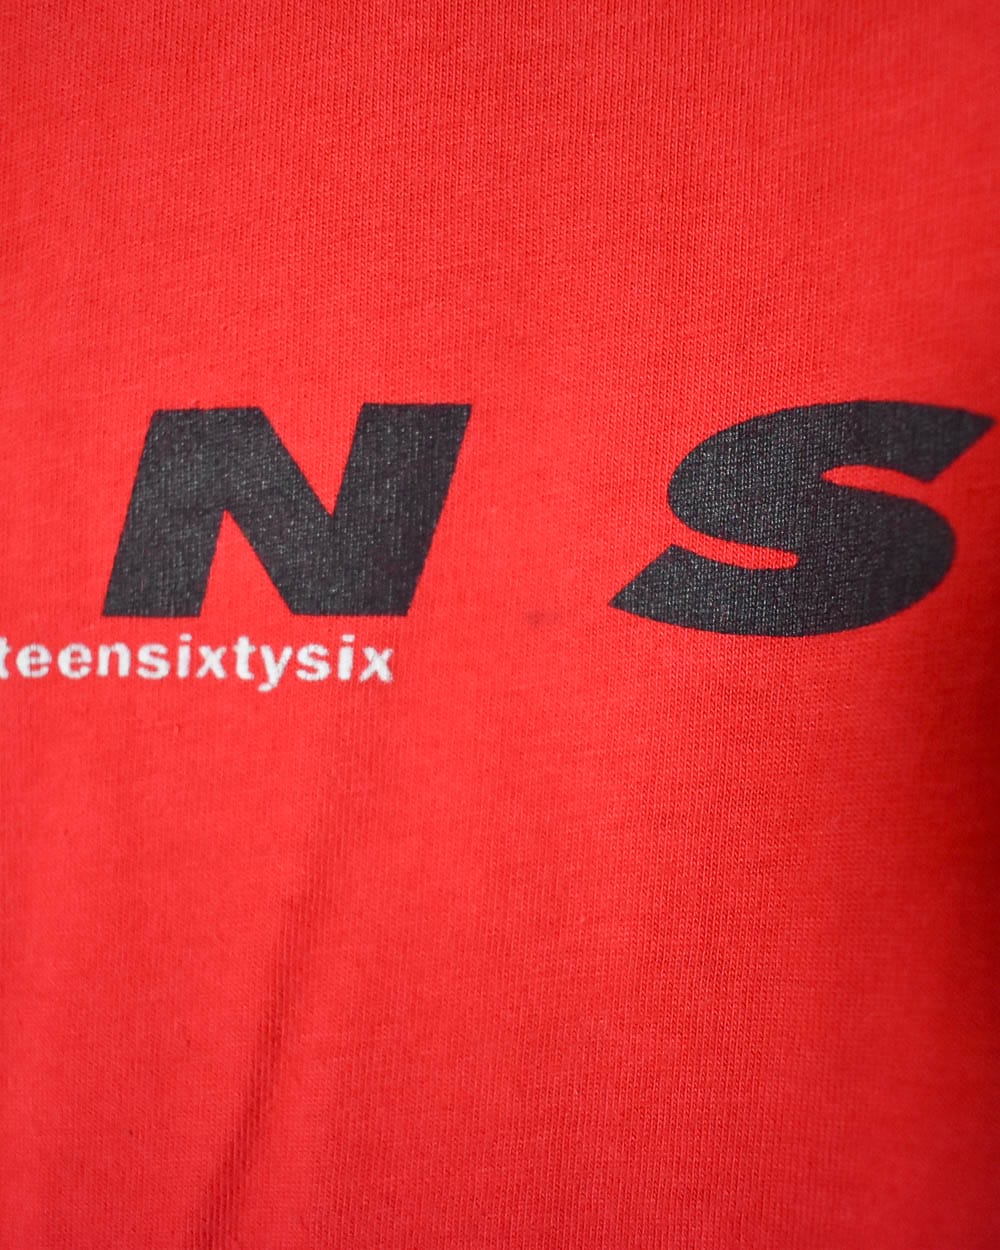 Red Vans T-Shirt - Small